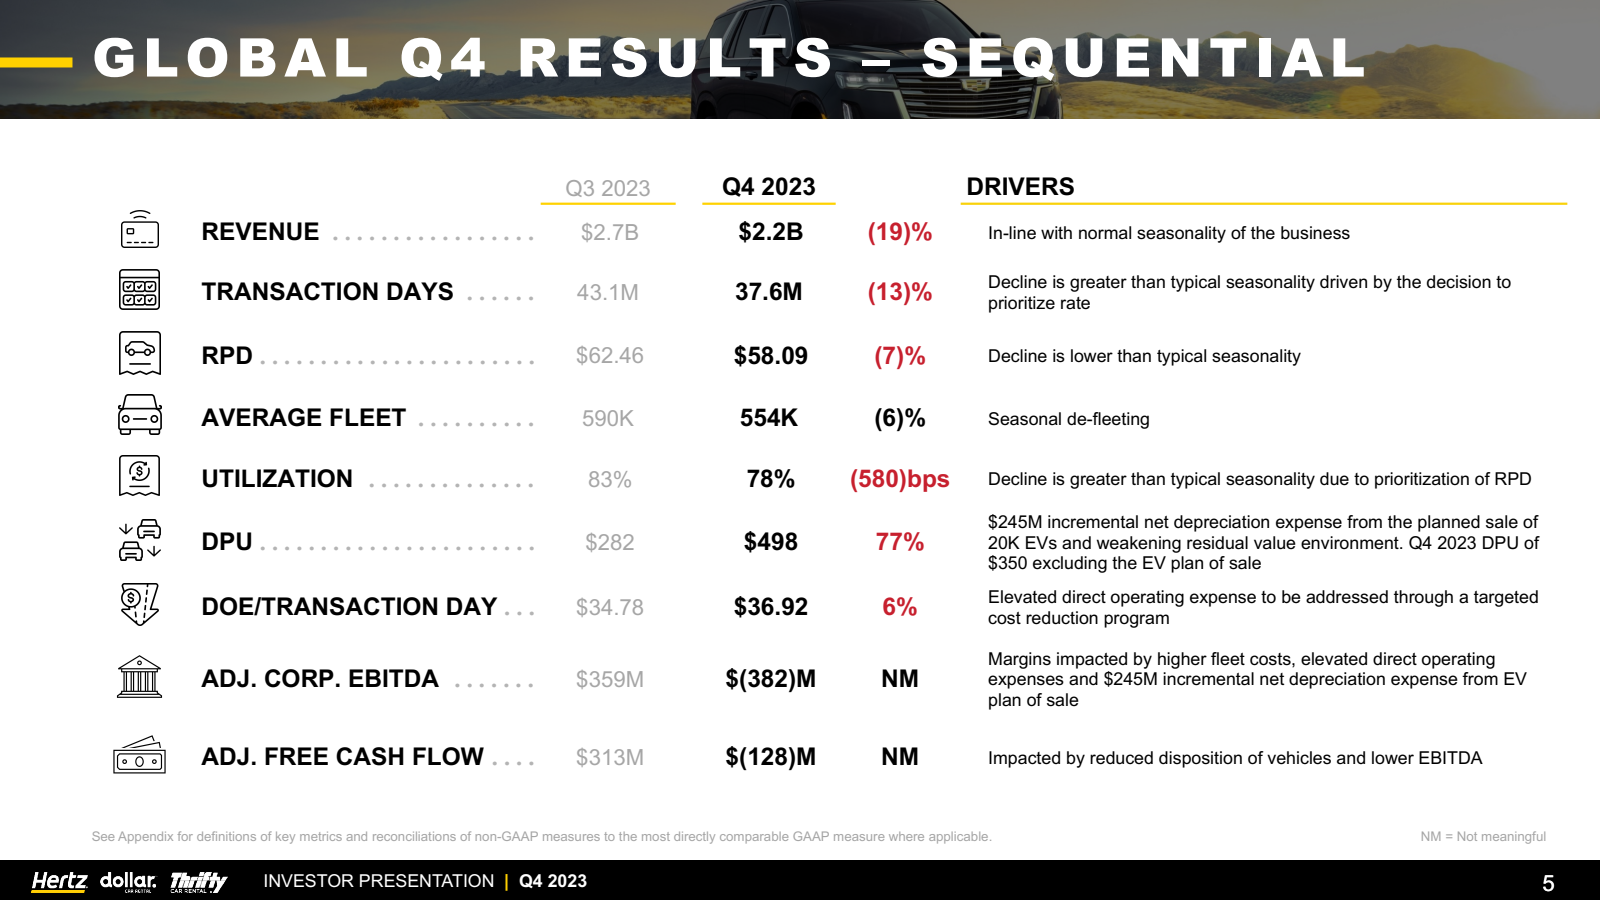 GLOBAL Q4 RESULTS 

